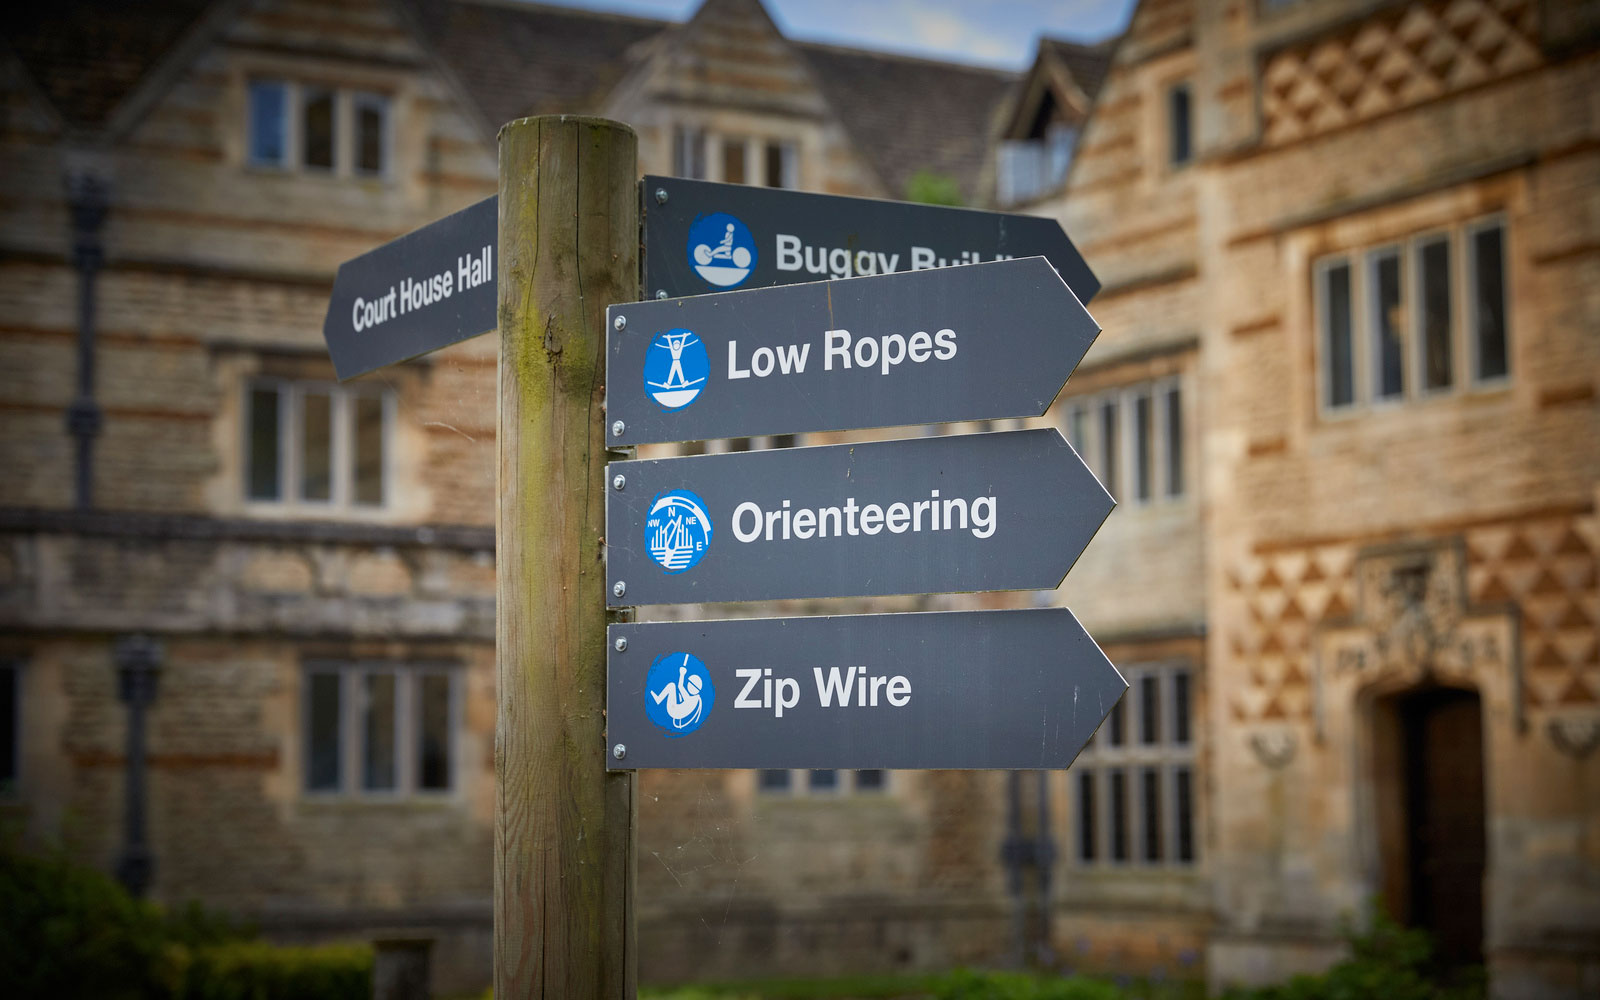 A directional sign pointing to low ropes, orienteering, zip wire and buggy building